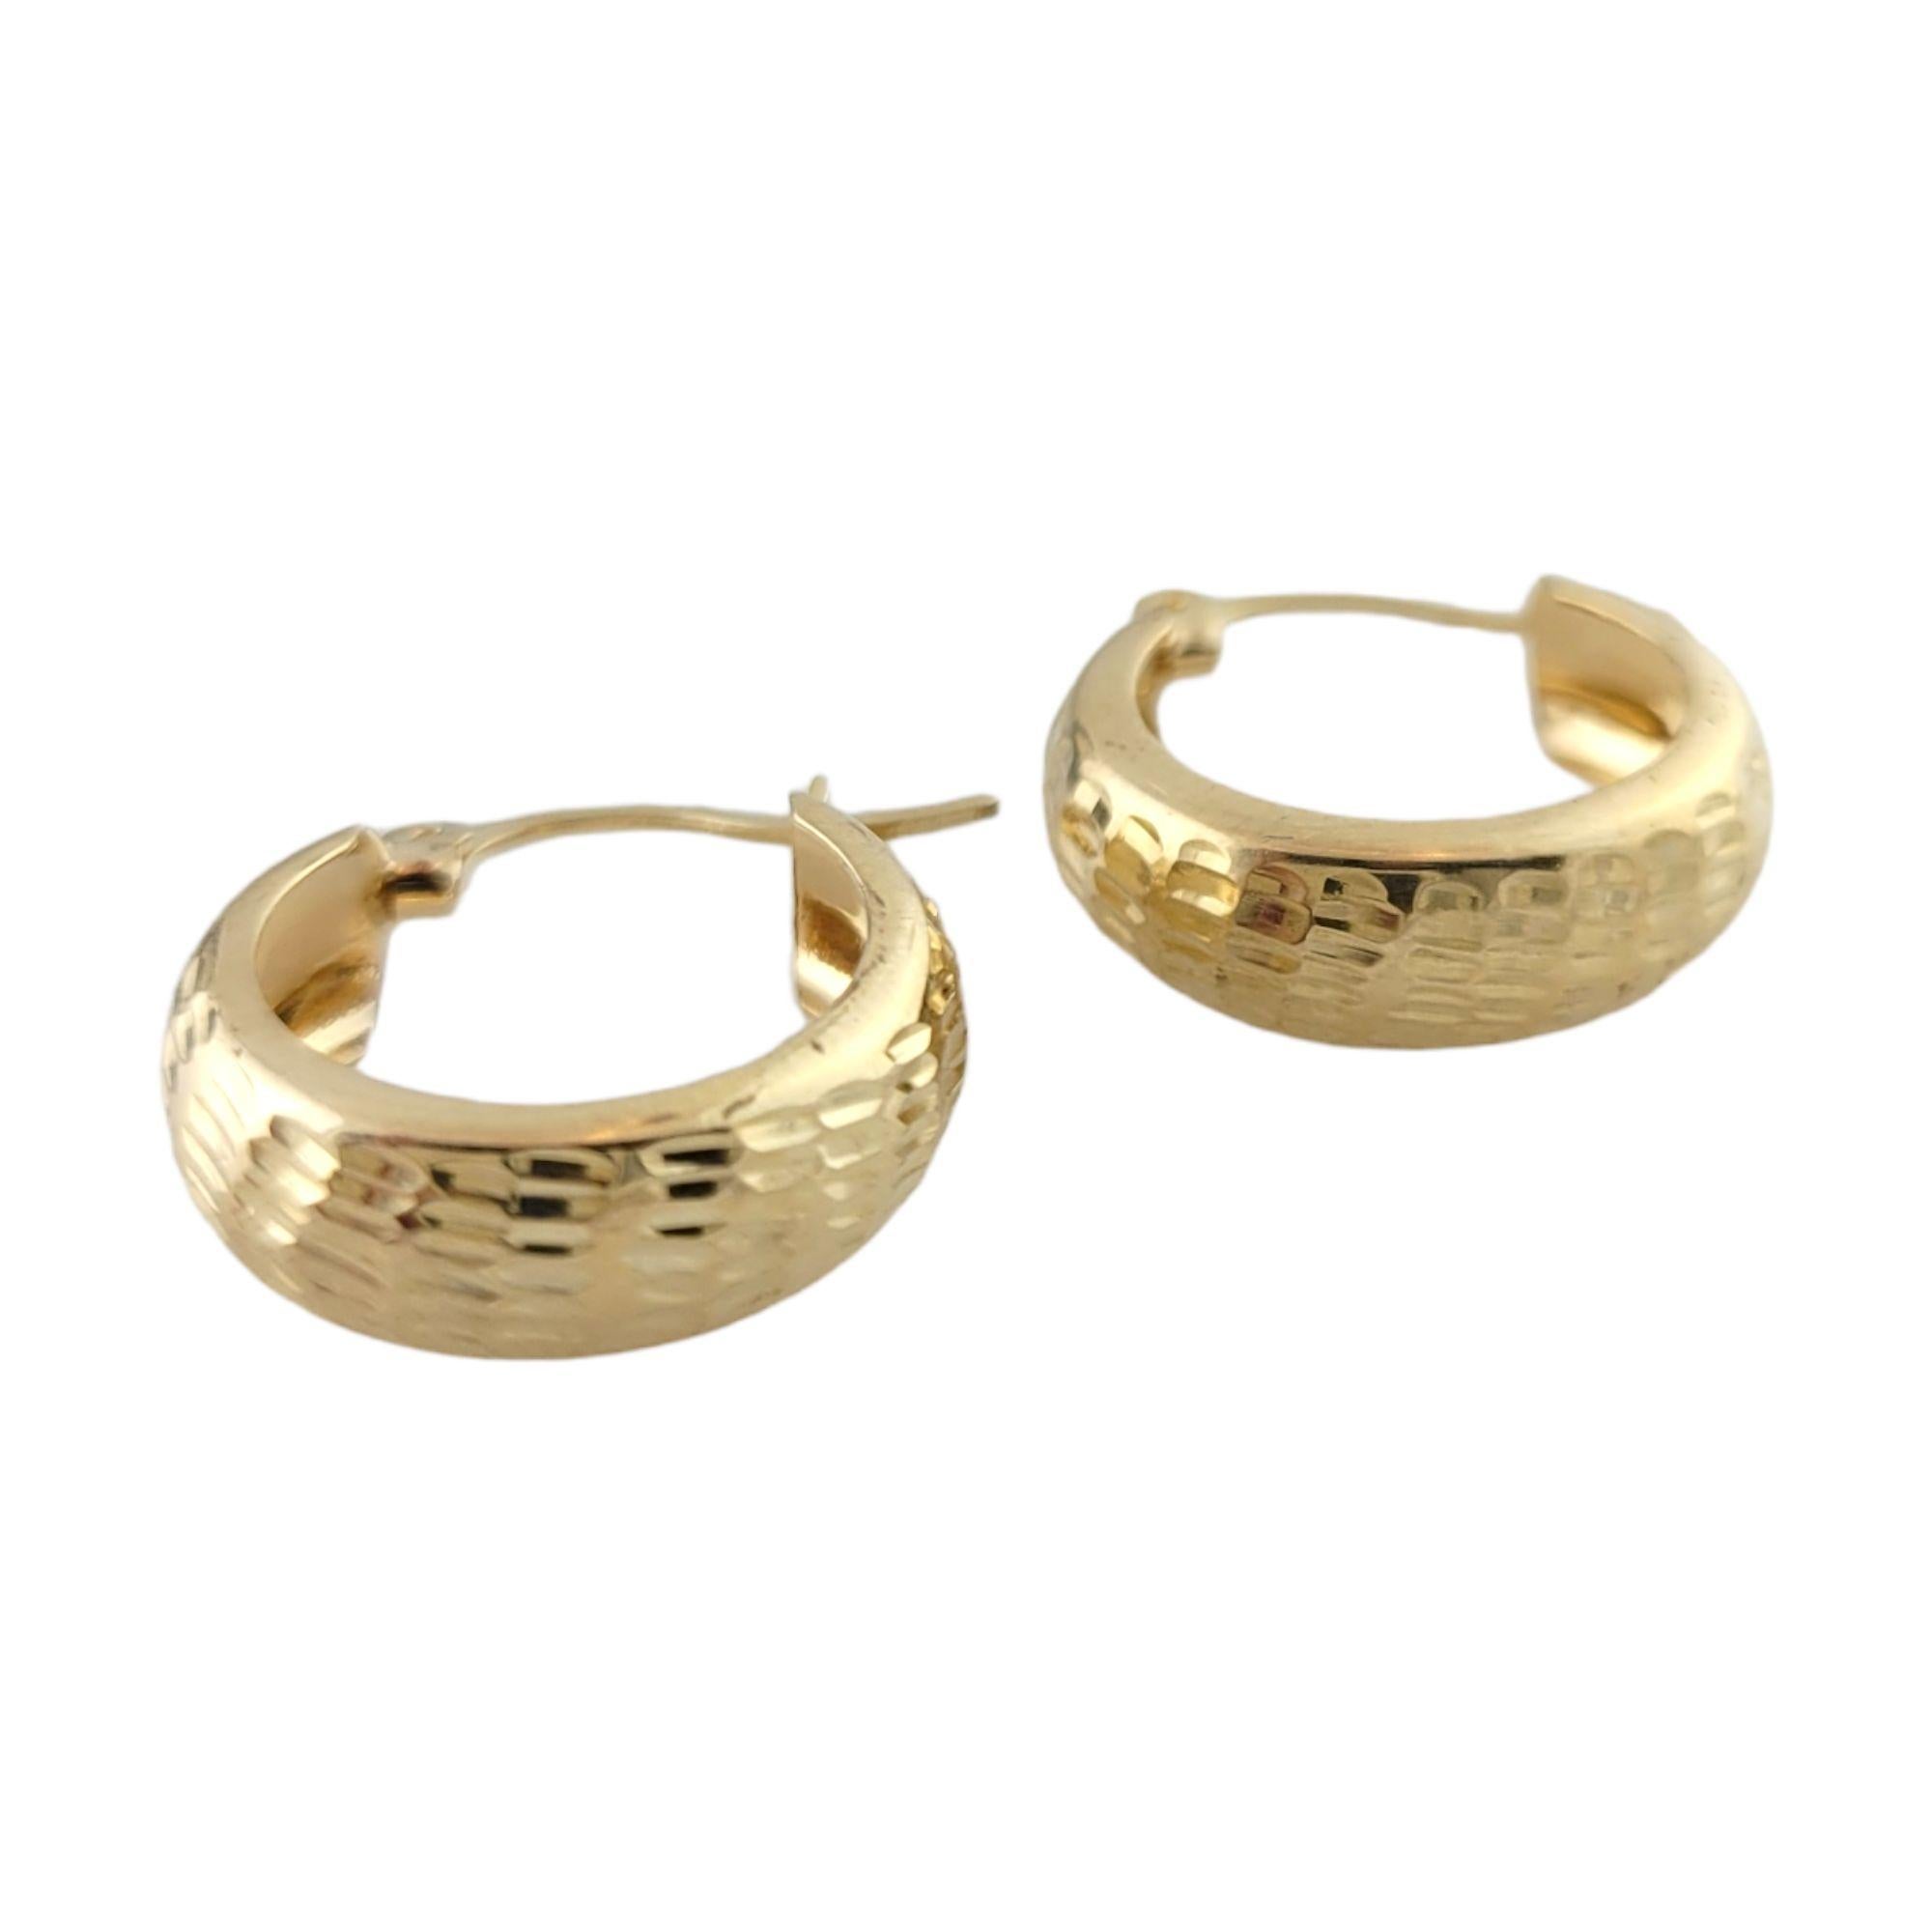 14K Yellow Gold Textured Hoops

This beautiful pair of 14K gold hoops have a gorgeous textured finish!

Size: 19mm X 16.5mm X 5mm

Weight: 1.8 g/ 1.1 dwt

Hallmark: Kit sinian 14K

Very good condition, professionally polished.

Will come packaged in